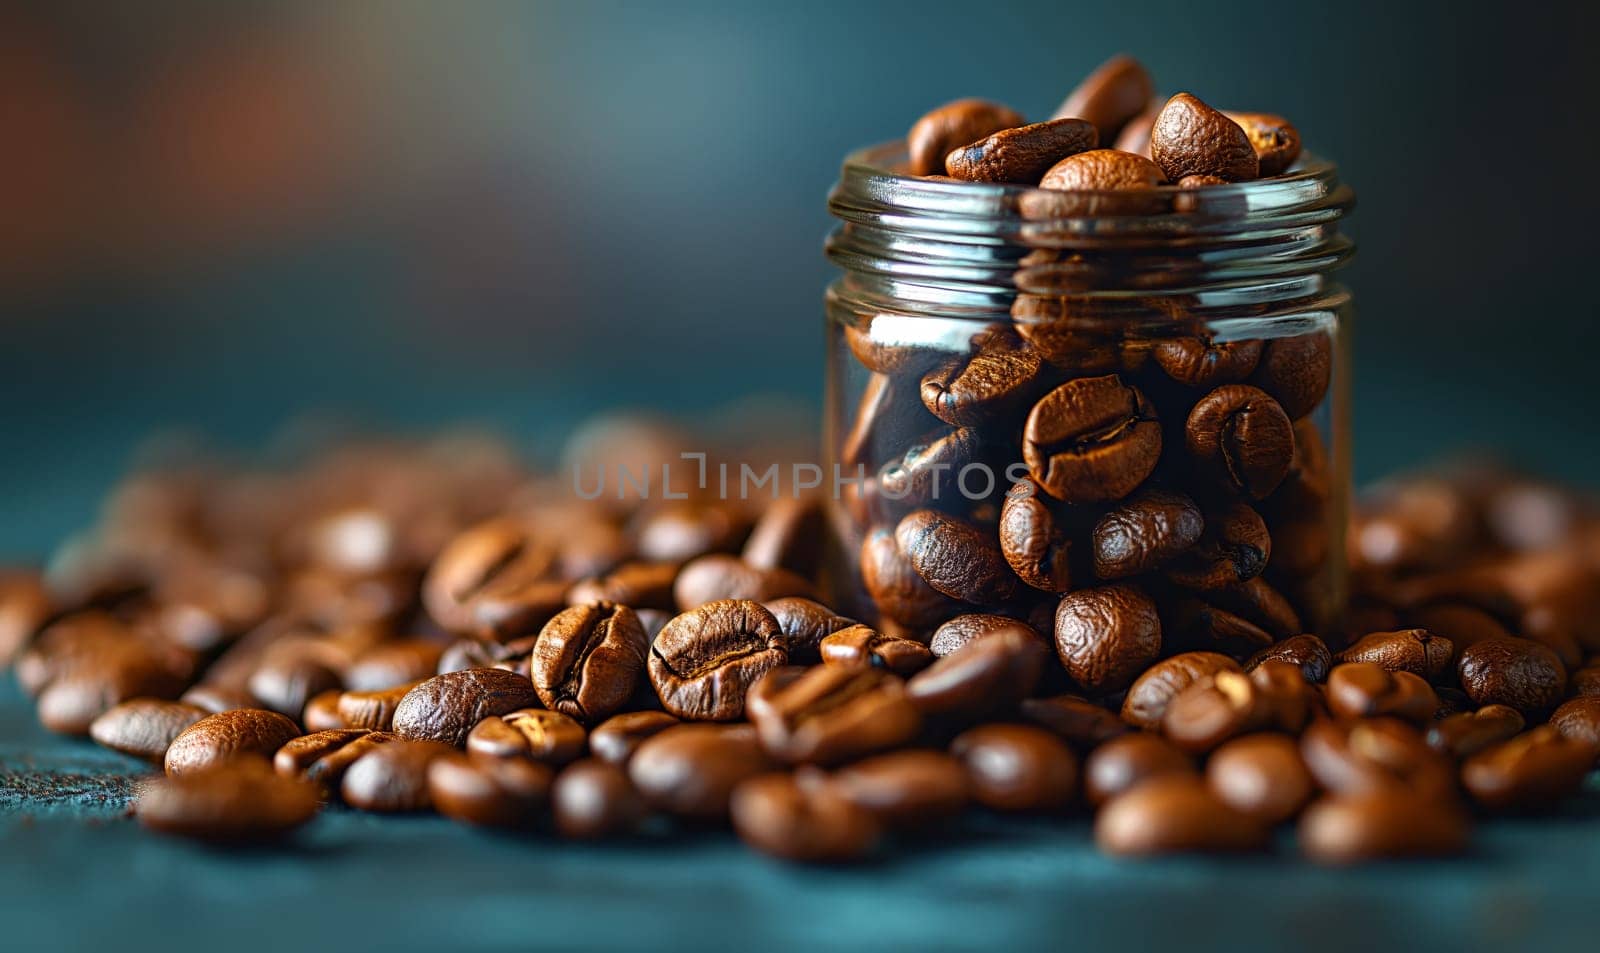 Roasted coffee beans on the table and in a glass jar. by Fischeron